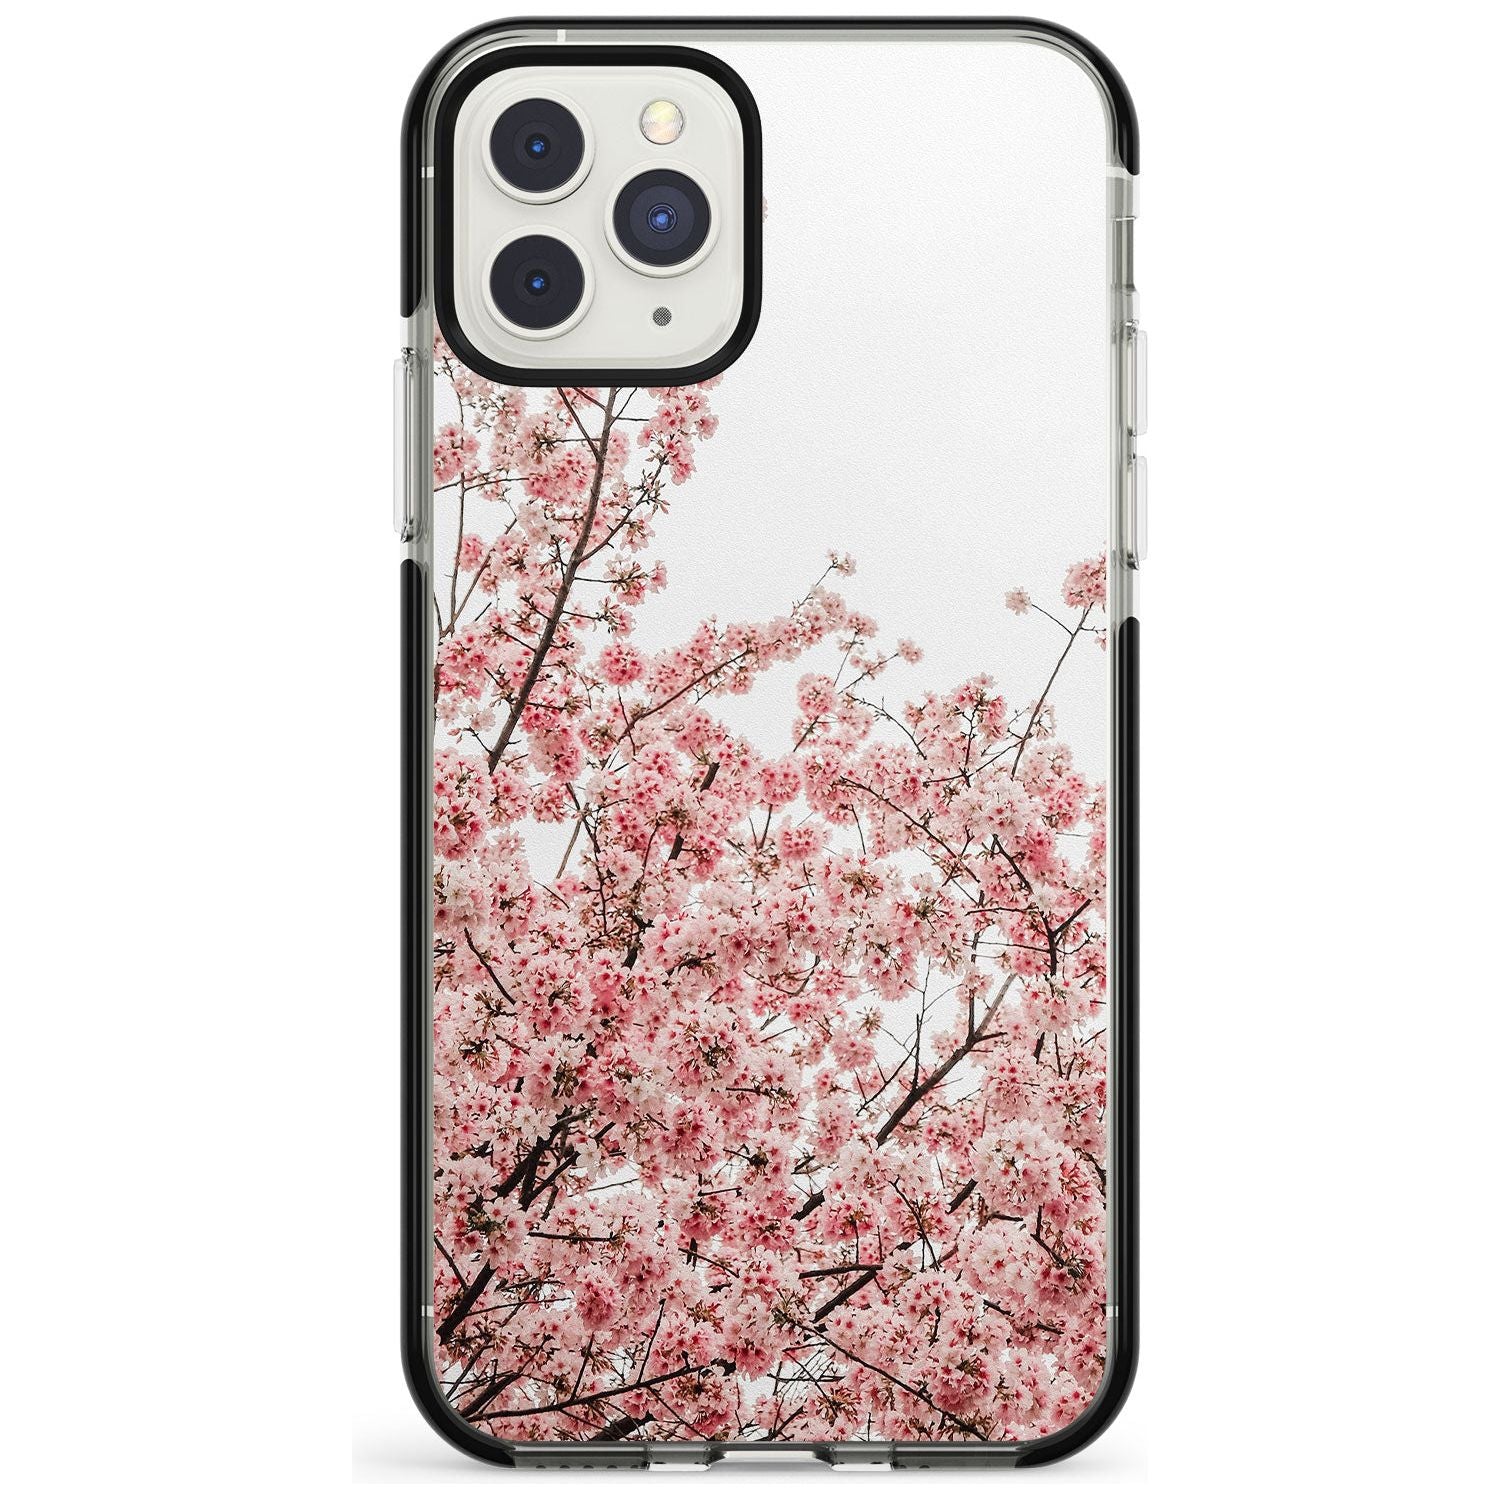 Cherry Blossoms - Real Floral Photographs Black Impact Phone Case for iPhone 11 Pro Max